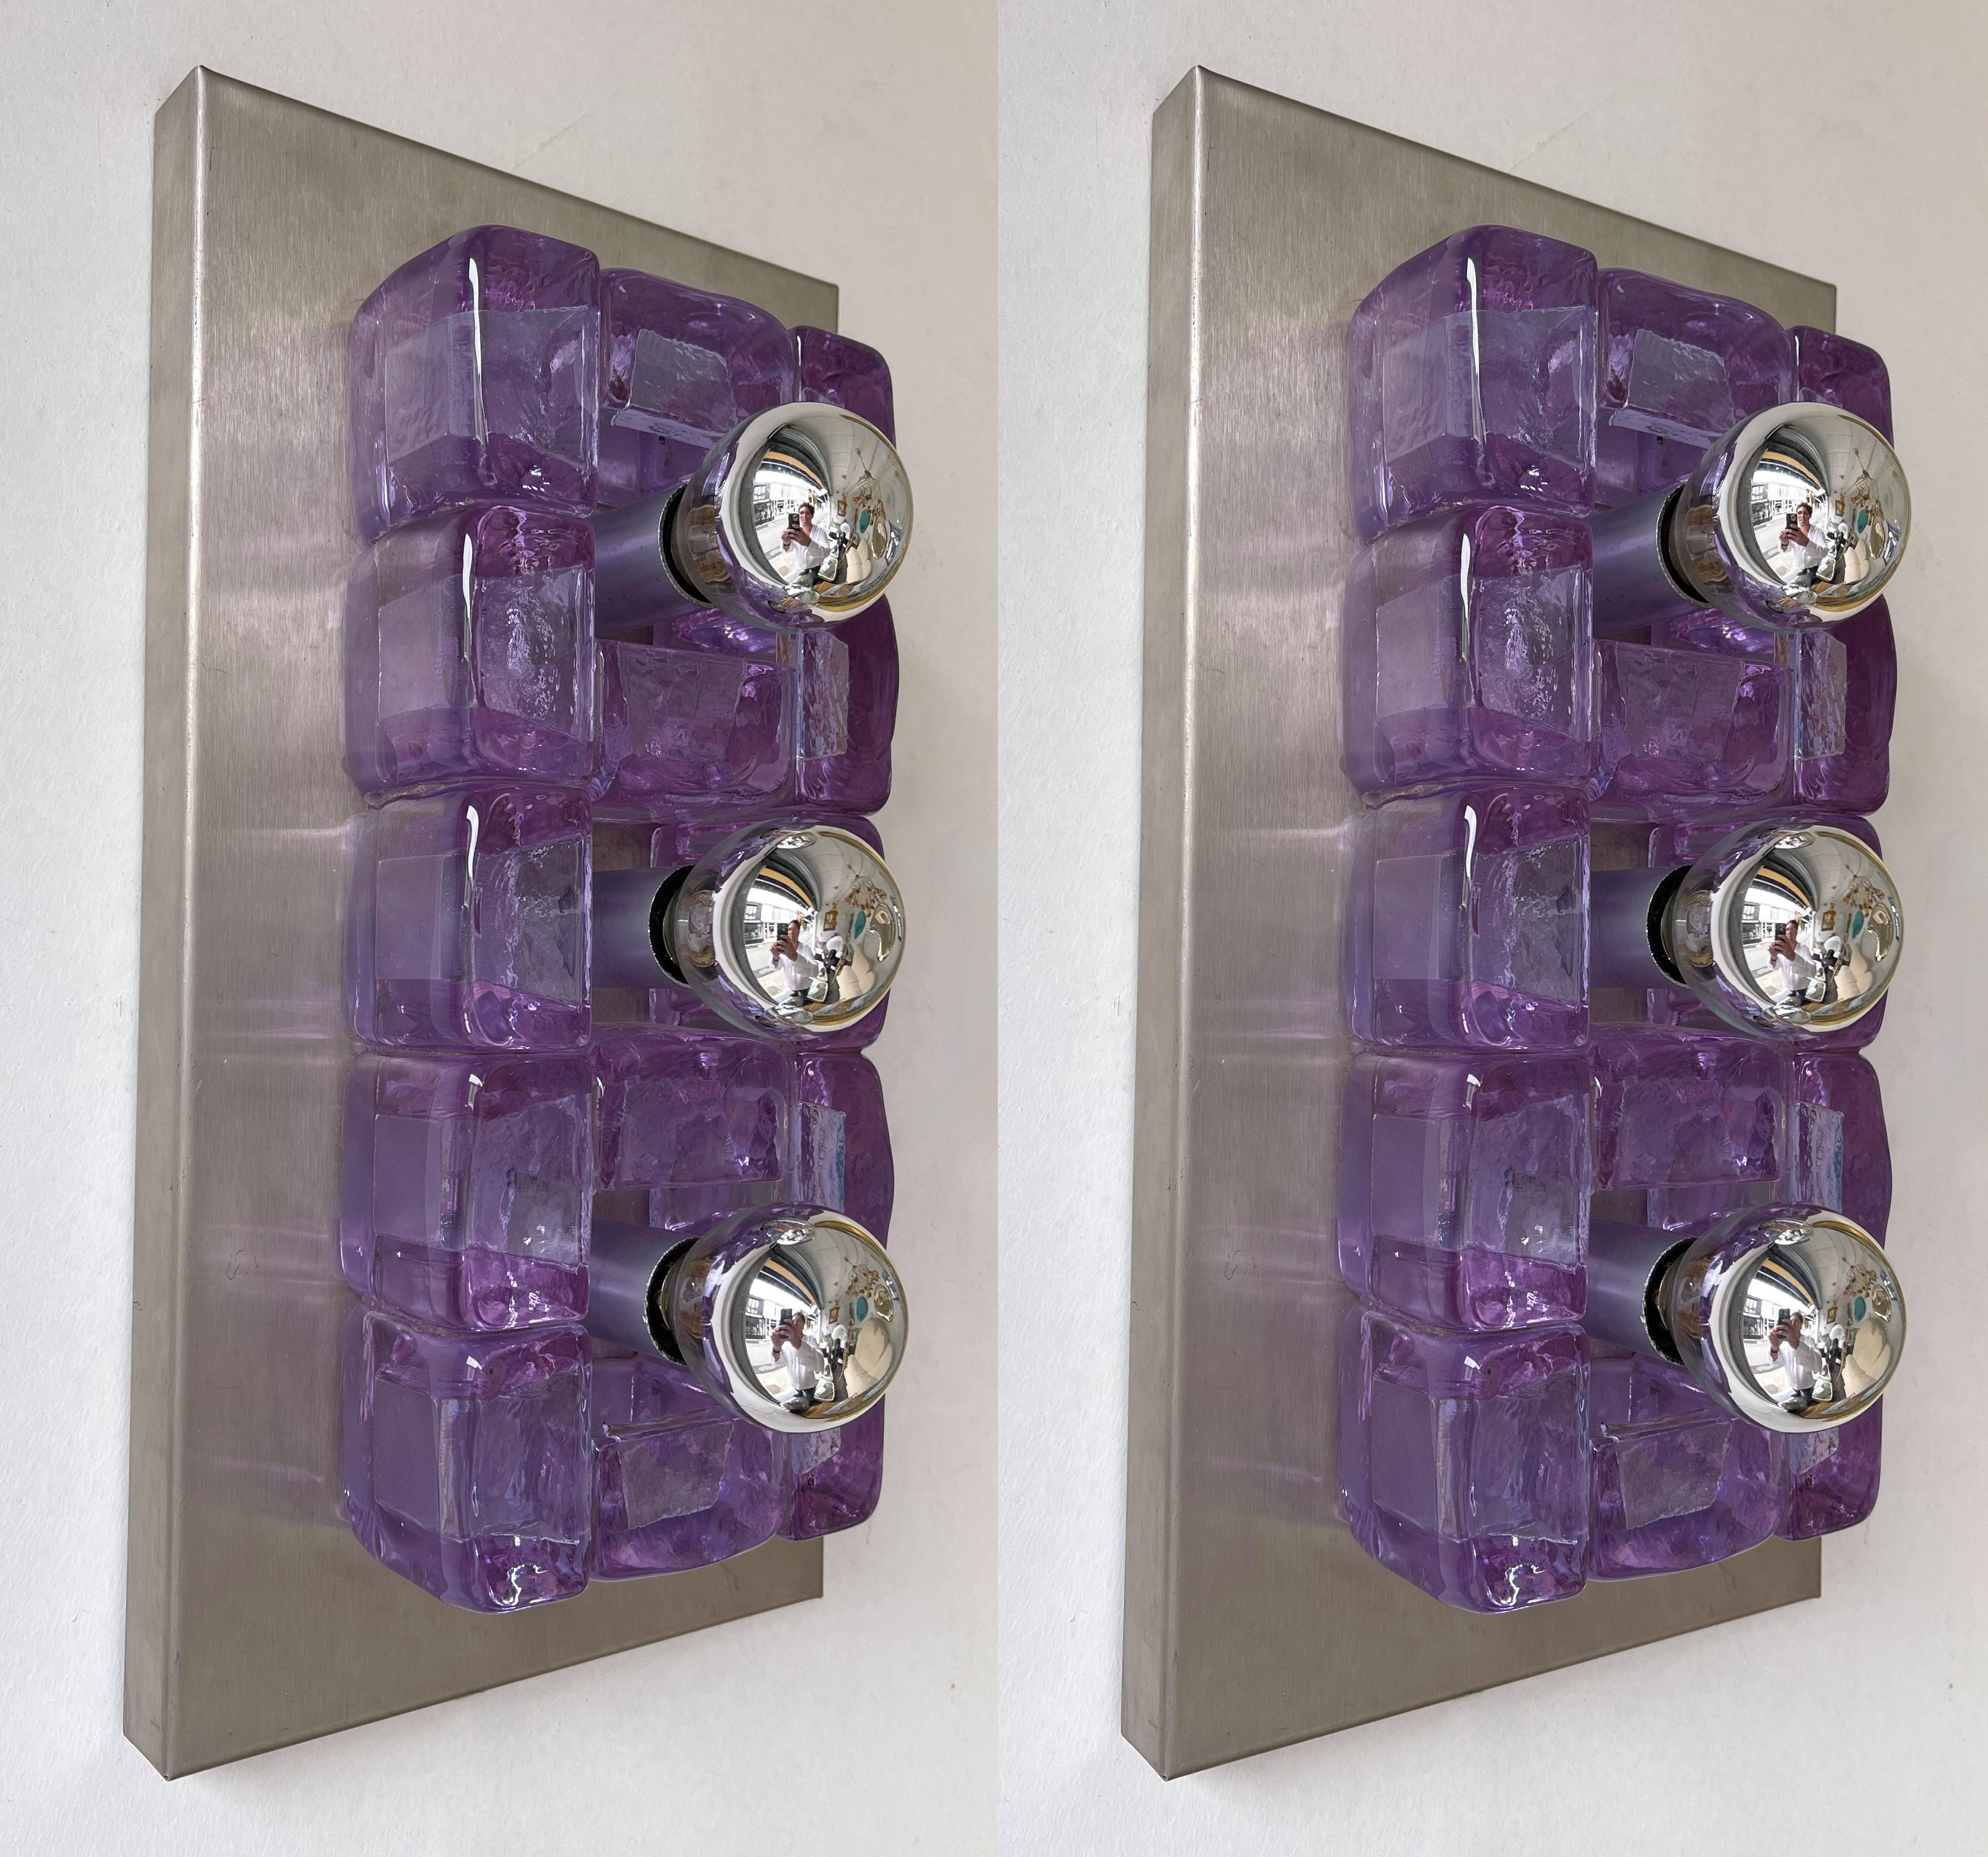 Pair of Glass Cube and Stainless Steel Sconces by Poliarte, Italy, 1970s For Sale 4